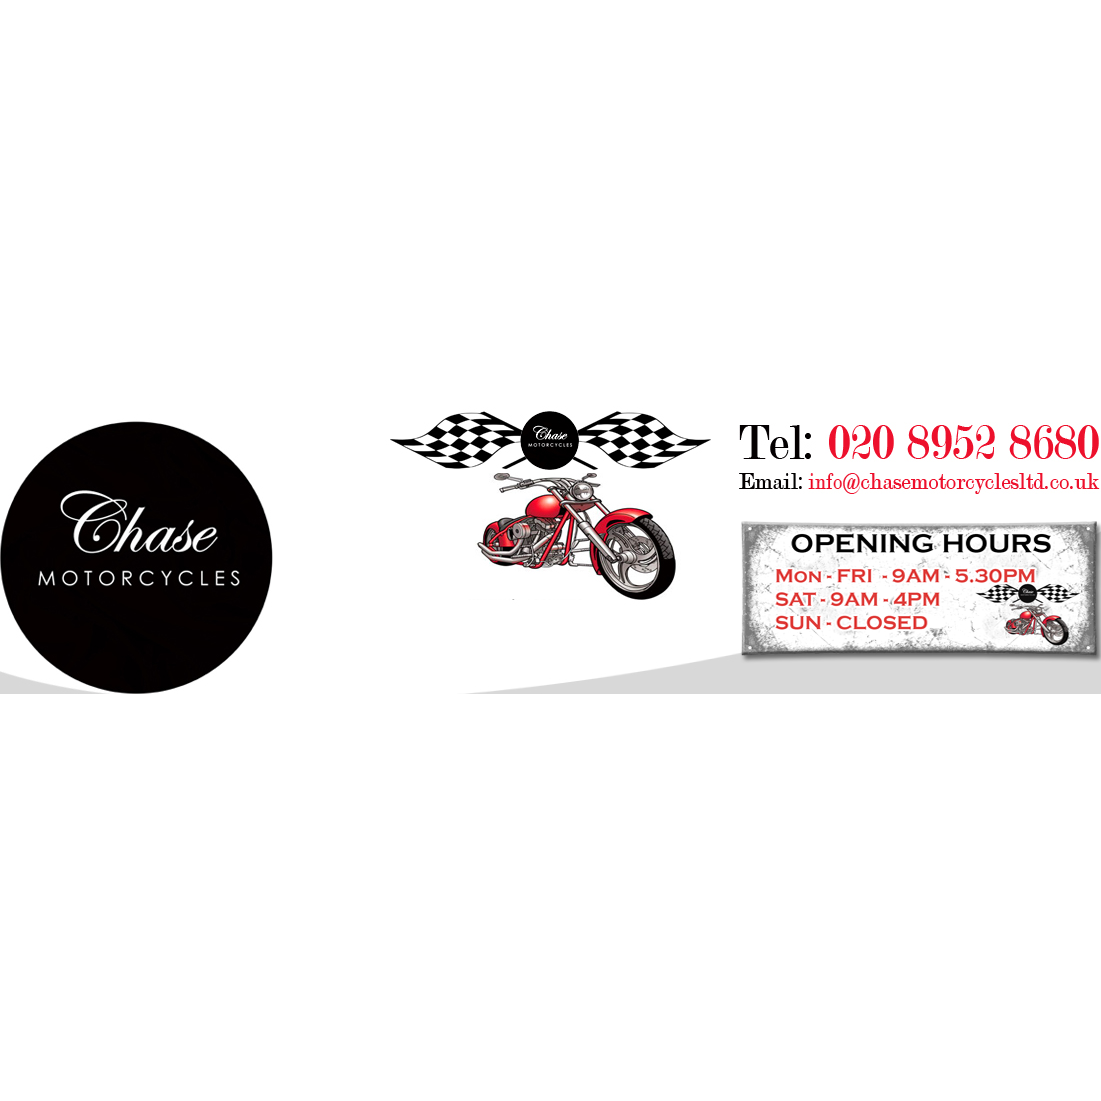 Chase Motorcycles Ltd - Walsall, West Midlands WS2 8EJ - 01922 643286 | ShowMeLocal.com